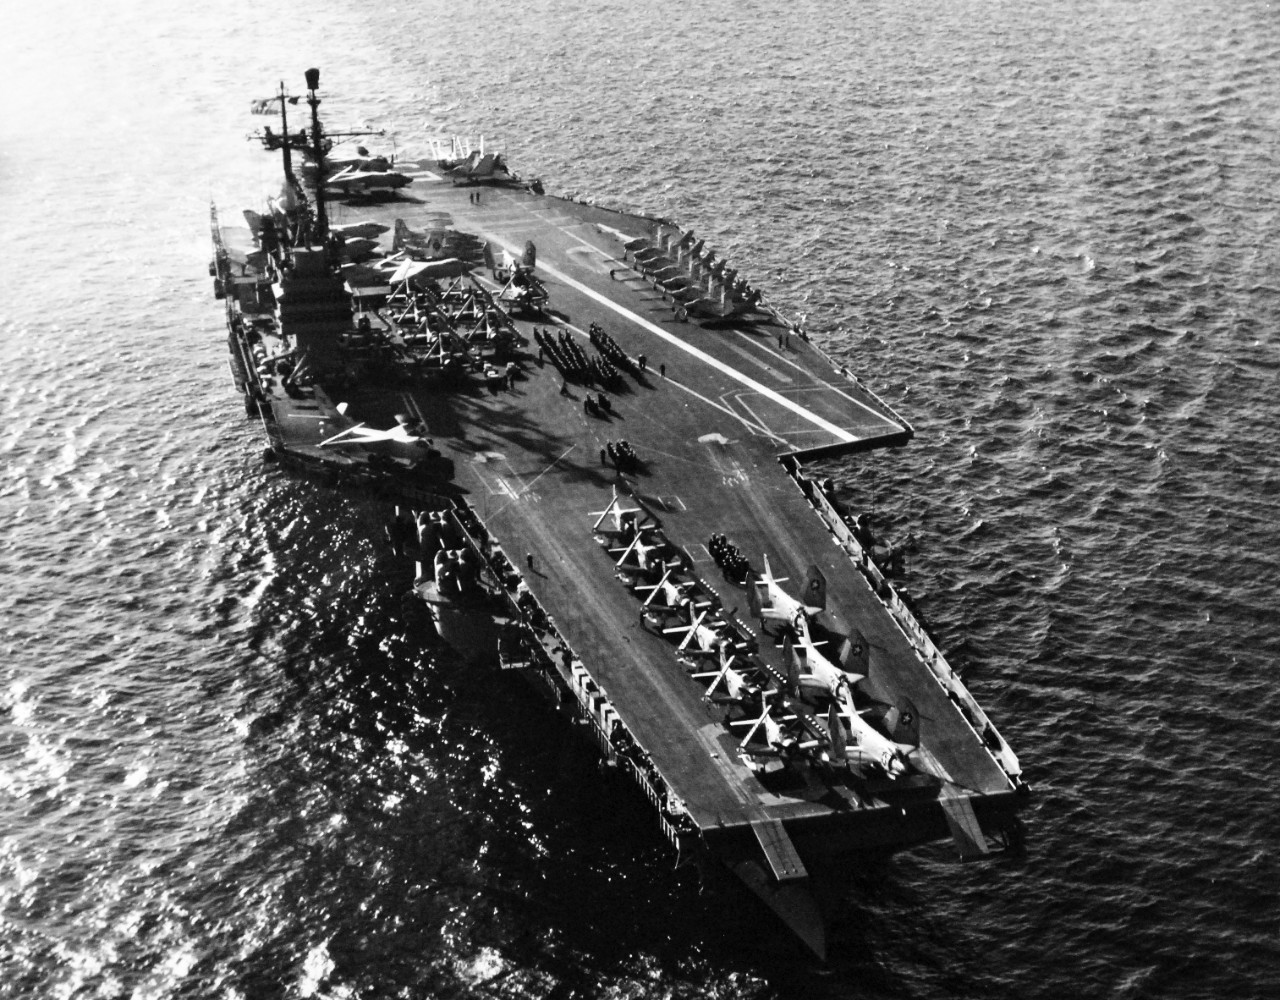 330-PS-8623 (USN 709972):    USS Forrestal (CVA-59), 1957)   The aircraft carrier with its air group embarked while on maneuvers with the Sixth Fleet.  The wide white line running diagonally across the flight deck is used by landing aircraft to aid lining up for landing.  Landing and launching may be accomplished simultaneously on the Navy’s latest “flat tops,” greatly increasing the ships operating efficiency.  The propeller driven AD Skyraiders on the forward flight deck, famous for low support work during the Korean War, are used for anti-submarine warfare and low altitude by the fleet.   Photograph released October 21, 1957.   Official U.S. Navy Photograph, now in the collections of the National Archives.   (2014/12/16)